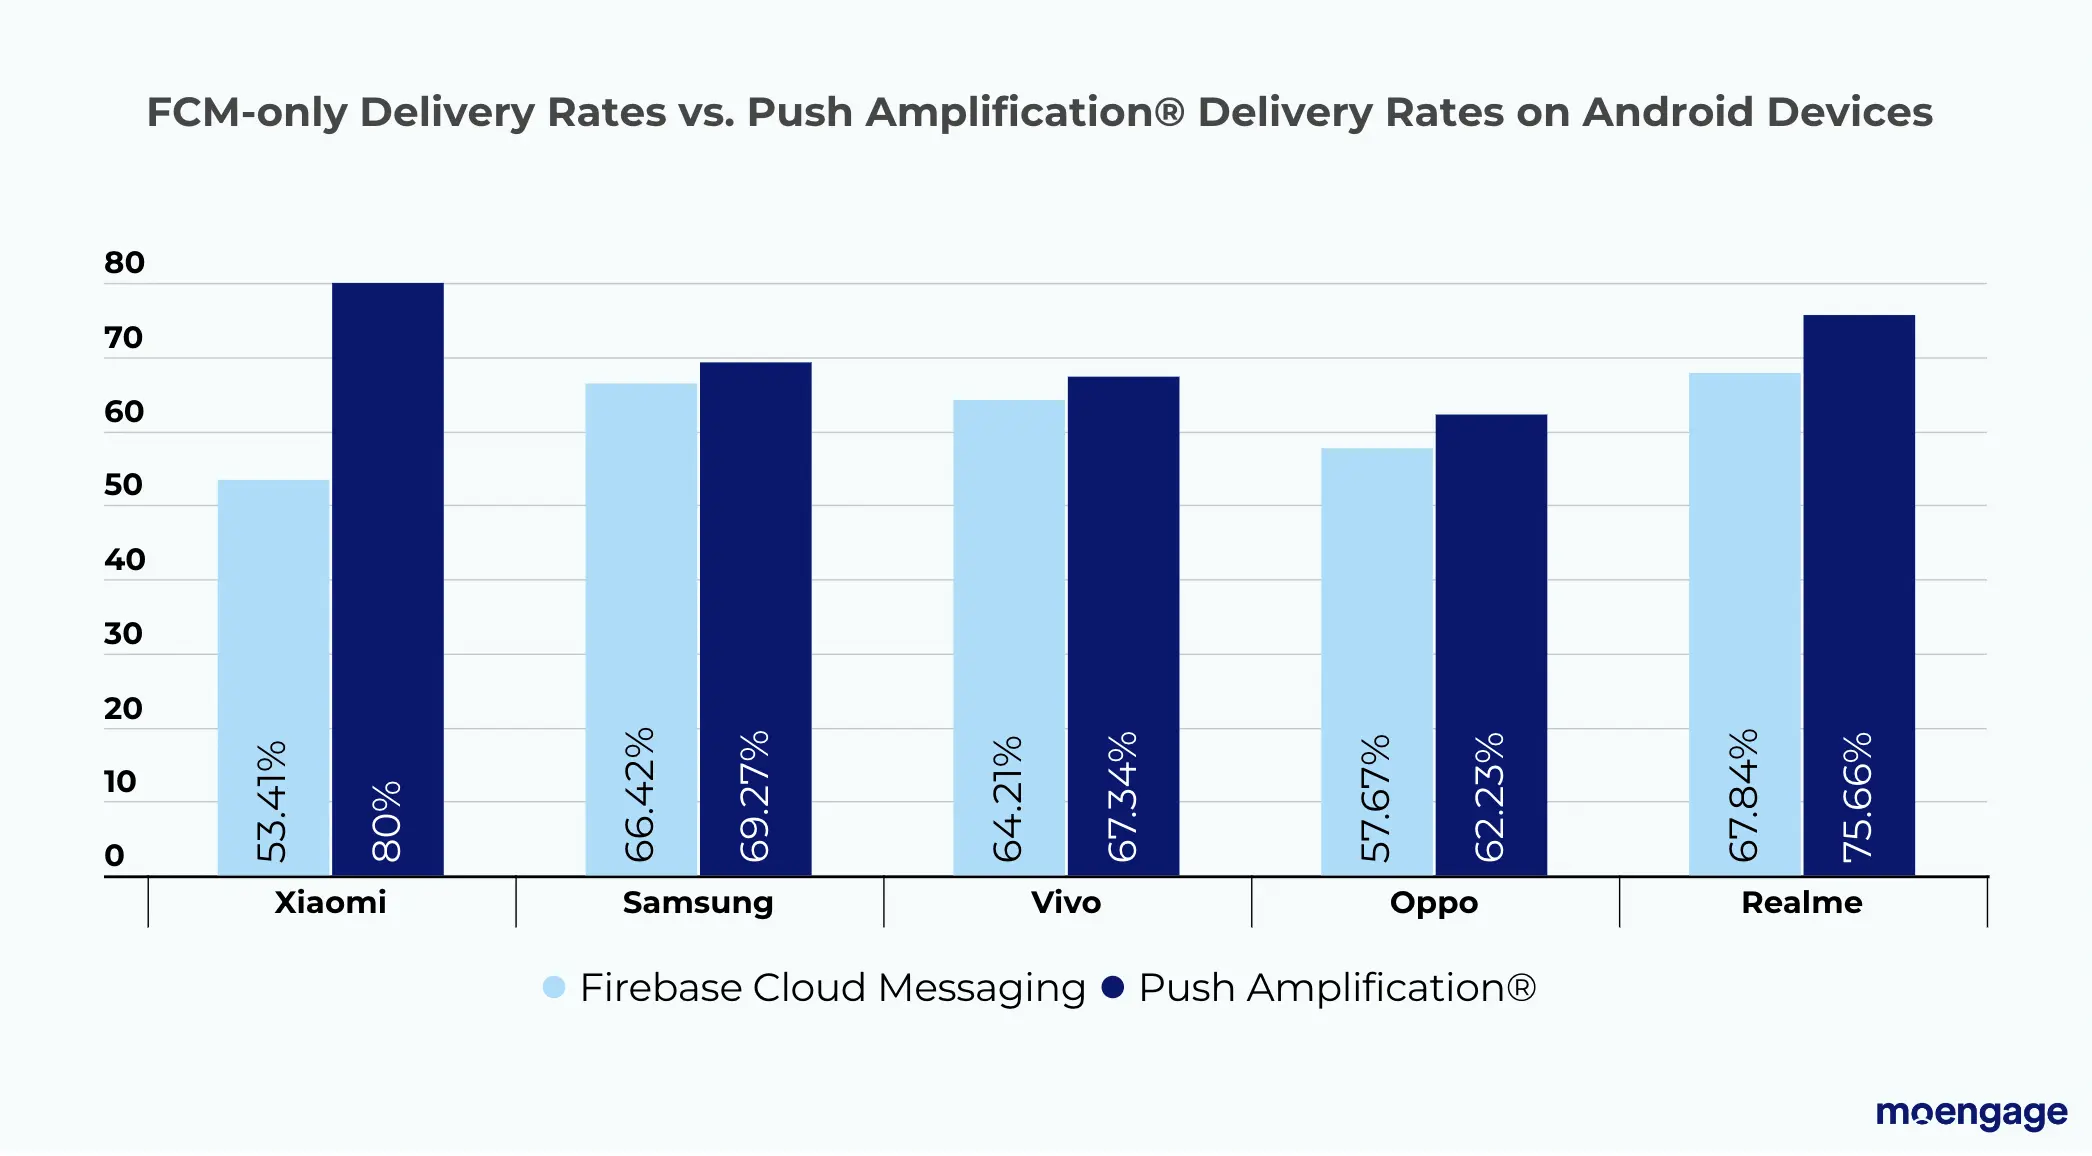 FCM-only delivery rates vs push amplification delivery rates on android devices